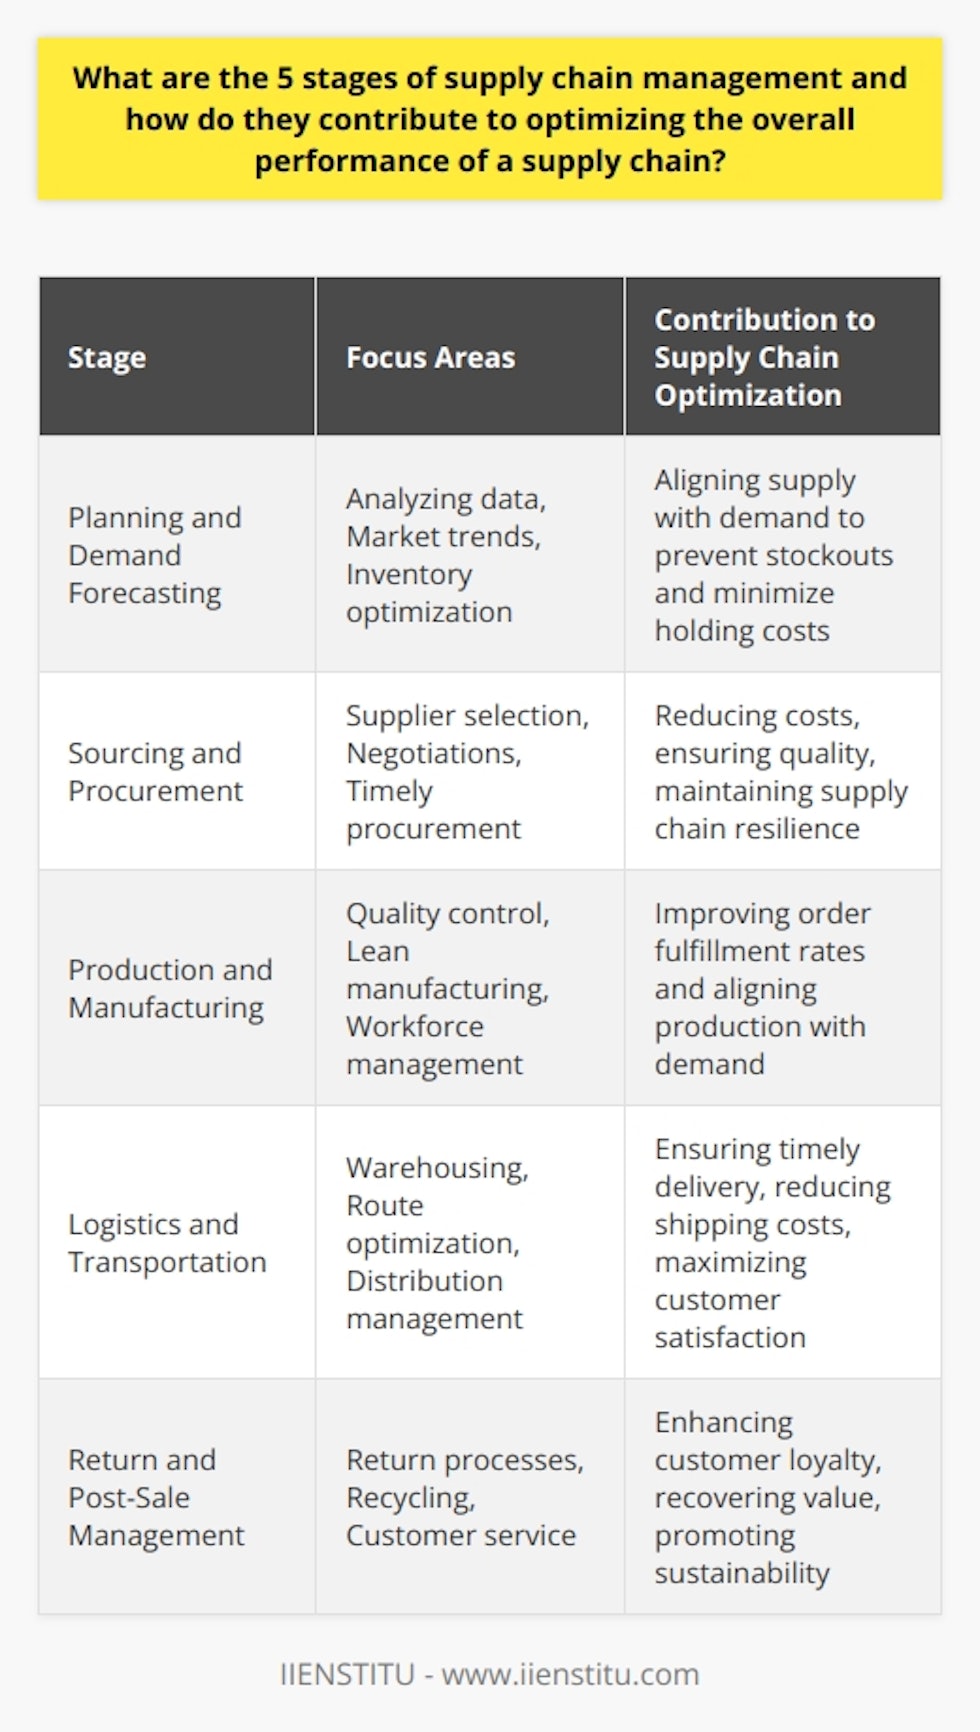 Supply chain management (SCM) is a critical aspect of a business's operations that ensures products are delivered to customers efficiently and effectively. The performance of an organization's supply chain has a profound impact on its operational success, customer satisfaction, and profitability. The supply chain management process can be broken down into five distinct stages, each critical for optimizing the entire system.Stage 1: Planning and Demand ForecastingAt the crux of a high-performing supply chain is comprehensive planning and demand forecasting. This stage revolves around predicting customer demand and planning how to meet it. Businesses analyze historical sales data, monitor market trends, and leverage analytics to forecast future demands accurately. This enables them to optimize inventory levels – having enough stock to fulfill orders without incurring excess holding costs. By effectively calibrating supply with demand, companies can evade stockouts and overstock situations that compromise financial performance and customer loyalty.Stage 2: Sourcing and ProcurementSourcing and procurement are about securing the materials and services needed to produce the company's products. Critical to this stage is selecting the right suppliers who can provide the necessary quality at the best price. Companies must negotiate favorable terms and establish relationships with suppliers that share their values and reliability standards. Procuring the right materials at the right time is paramount to prevent production delays. Effective sourcing strategies can directly reduce operational costs, secure supply chain resilience, and contribute to product quality.Stage 3: Production and ManufacturingThe third stage involves the actual creation of the products – either by manufacturing them from raw materials or assembling pre-made components. Efficient production is about more than just speed; it encompasses quality control, workforce management, and the streamlining of processes through methods like lean manufacturing. By focusing on reducing waste, managing inventory effectively, and ensuring that production schedules align with demand forecasts, companies can dramatically improve their supply chain performance. This stage directly affects product availability, order fulfillment rates, and the capacity to meet customer expectations for quality.Stage 4: Logistics and TransportationLogistics and transportation cover the planning and execution involved in moving the goods from the manufacturer to the end customer. This encompasses warehousing, choosing appropriate delivery methods, and managing distribution networks. In today's global economy, these logistical considerations can be complex, involving multiple transportation modes and international shipping regulations. Efficient logistics management ensures products arrive at the right place and the right time, reducing shipping costs and enhancing customer satisfaction. Advanced technologies like route optimization software and real-time tracking can provide valuable insights and flexibility, enabling companies to respond swiftly to logistical challenges.Stage 5: Return and Post-Sale ManagementThe post-sale phase, which might include returns, repairs, recycling, or disposal, is often overlooked, yet it is vital for customer satisfaction and sustainability. An effective return management system must be nimble and customer-centric, allowing for painless product returns or exchanges. Handling returns well can recover value from returned items while maintaining customer goodwill. In today's environmentally-conscious marketplace, the proper disposal and recycling of products are also of significant importance. A green supply chain not only appeals to eco-friendly consumers but can also lead to cost savings through materials recovery and waste reduction.In essence, each stage of supply chain management is intertwined with the others, and companies must approach SCM holistically. Adequate attention and resources allocated to planning, sourcing, production, logistics, and post-sale management can lead to a supply chain that is not only efficient and cost-effective but also resilient and customer-focused. By carefully orchestrating these stages, businesses can derive competitive advantages, enhance their brand reputation, and achieve financial success.